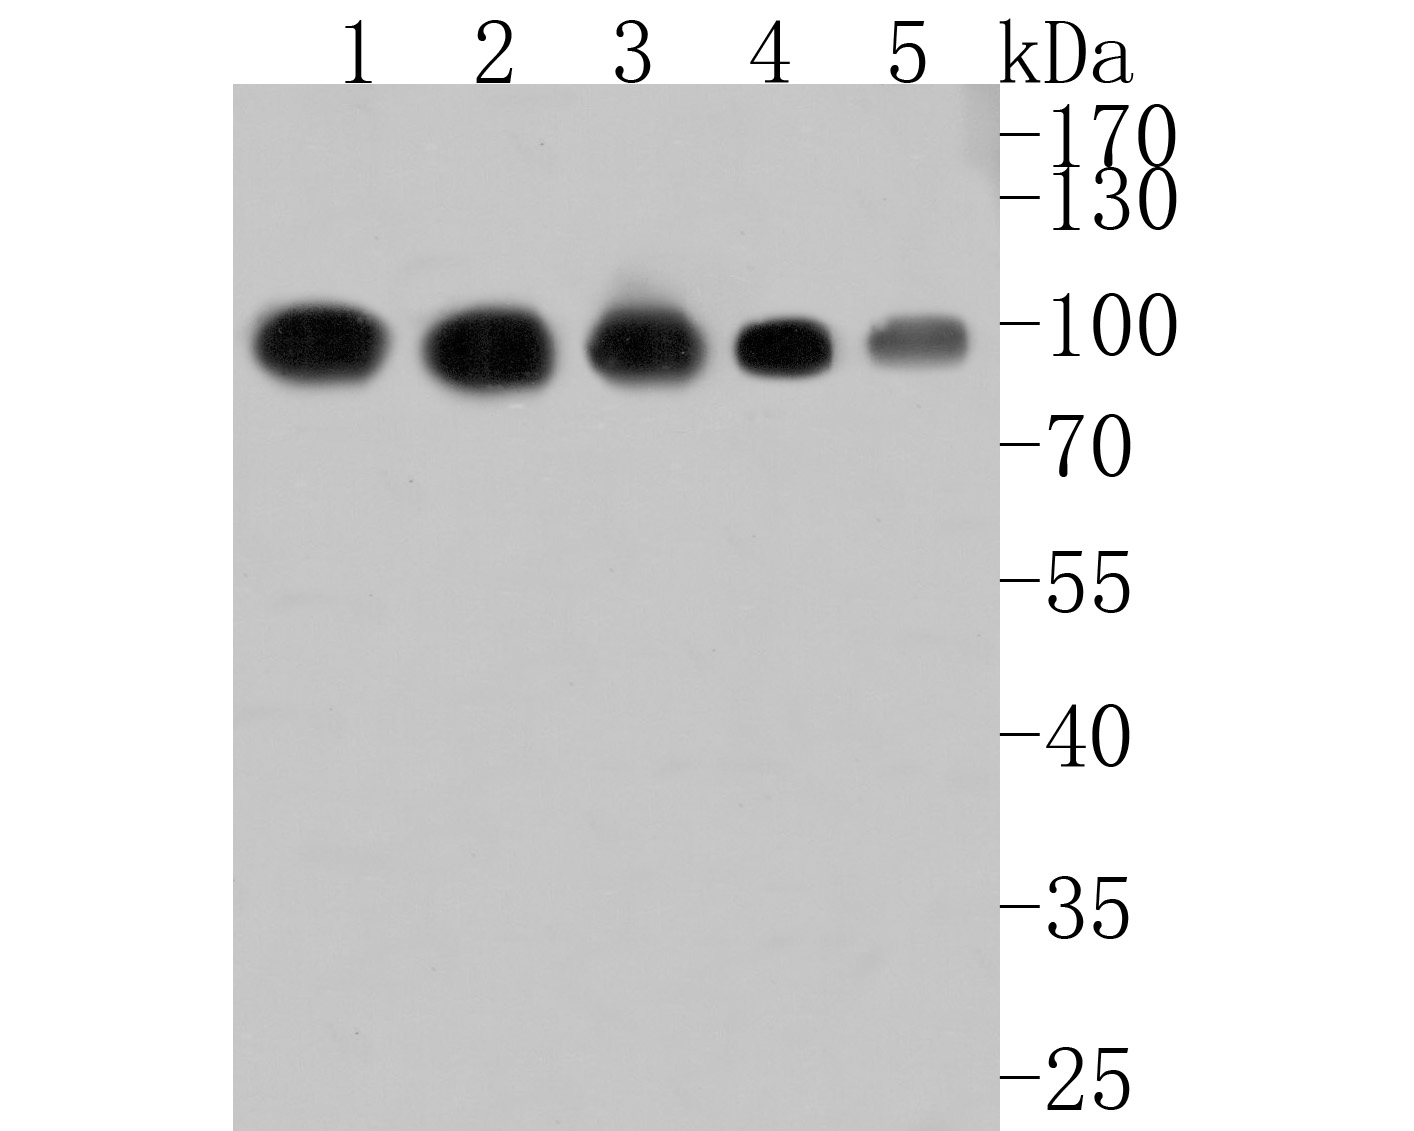 Western blot analysis of Glucosidase 2 subunit beta on different lysates. Proteins were transferred to a PVDF membrane and blocked with 5% BSA in PBS for 1 hour at room temperature. The primary antibody (HA500152, 1/1,000) was used in 5% BSA at room temperature for 2 hours. Goat Anti-Rabbit IgG - HRP Secondary Antibody (HA1001) at 1:200,000 dilution was used for 1 hour at room temperature.<br />
Positive control: <br />
Lane 1: Hela cell lysate<br />
Lane 2: Jurkat cell lysate<br />
Lane 3: A431 cell lysate<br />
Lane 4: Rat kidney tissue lysate<br />
Lane 5: Rat liver tissue lysate